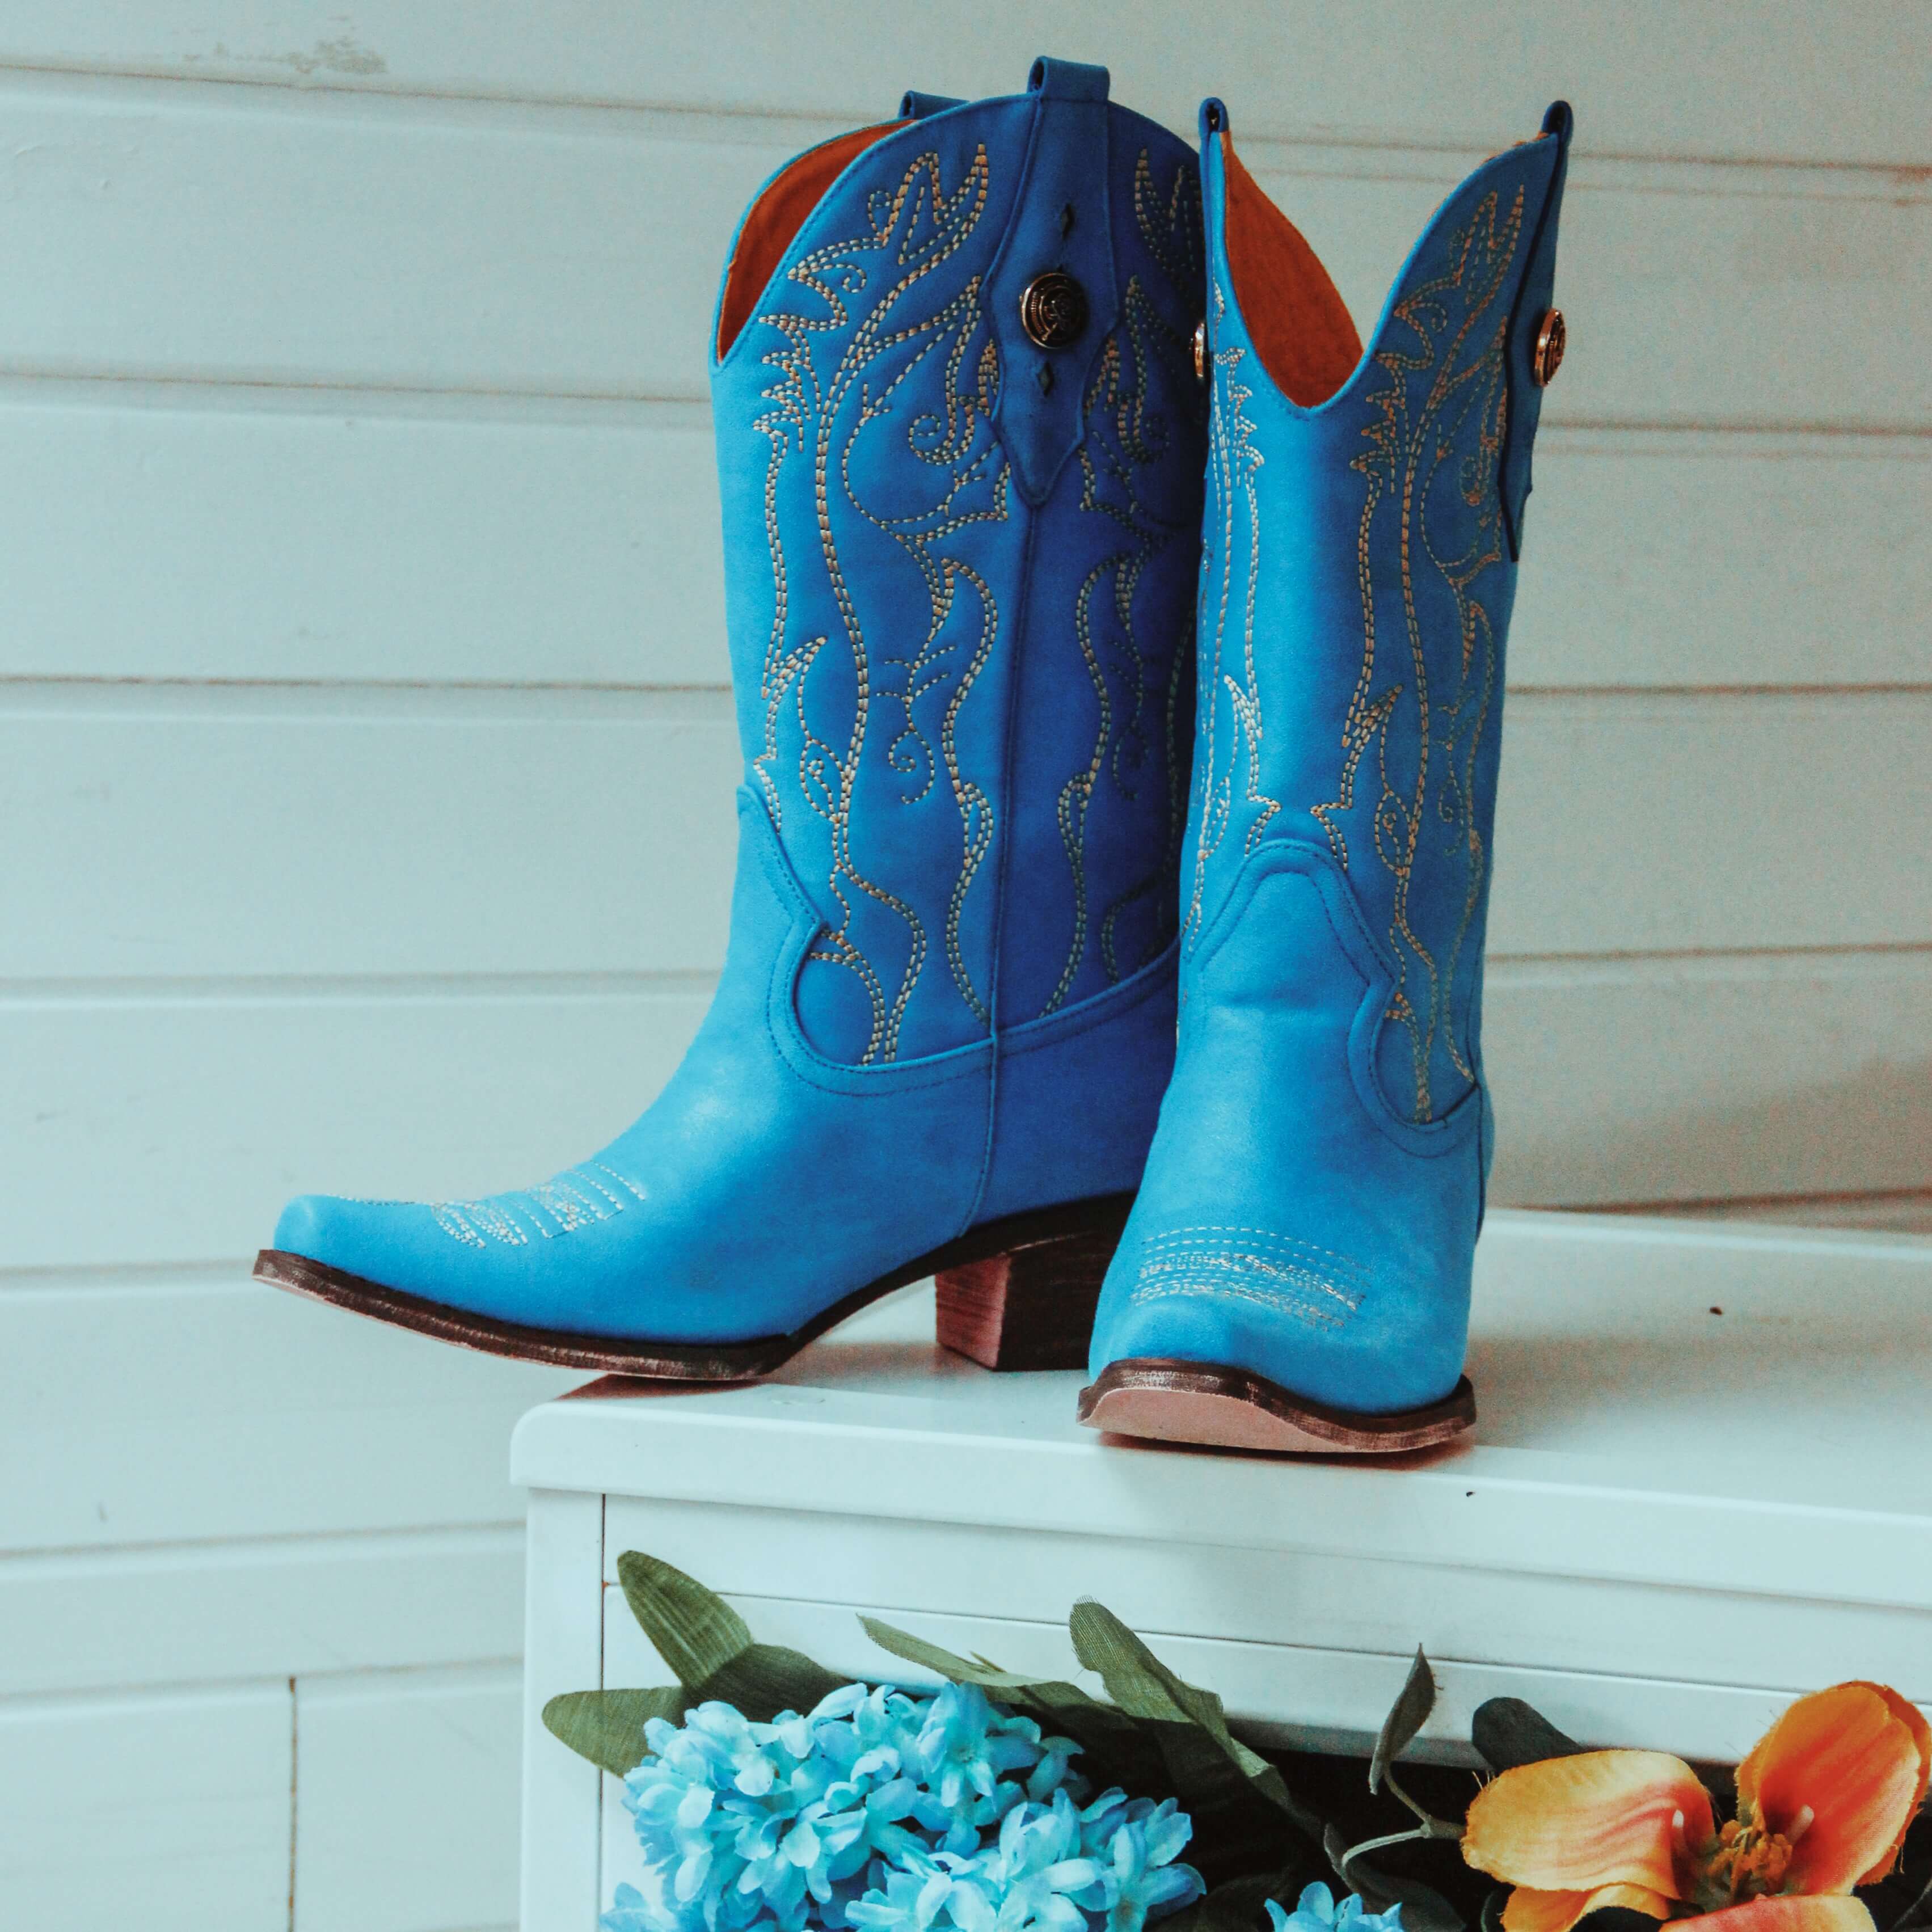 How to Wear Cowboy Boots in Summer? | Rose Gentle Boots